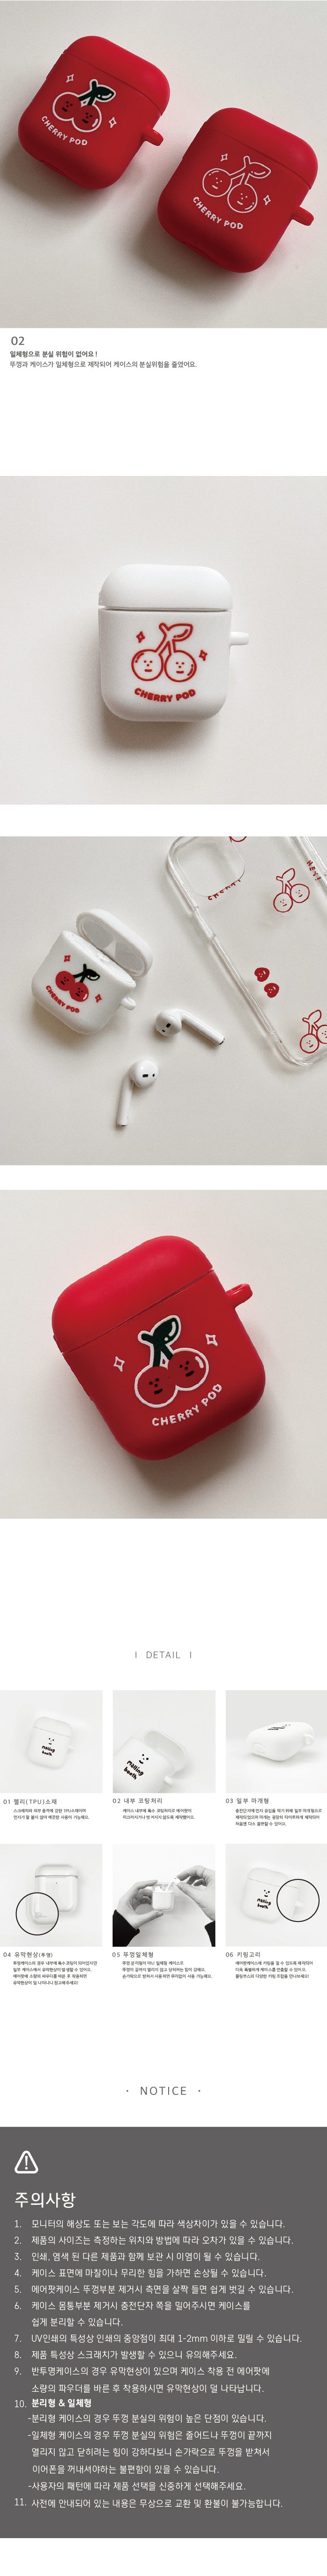 Twinkle cherry AirPods case